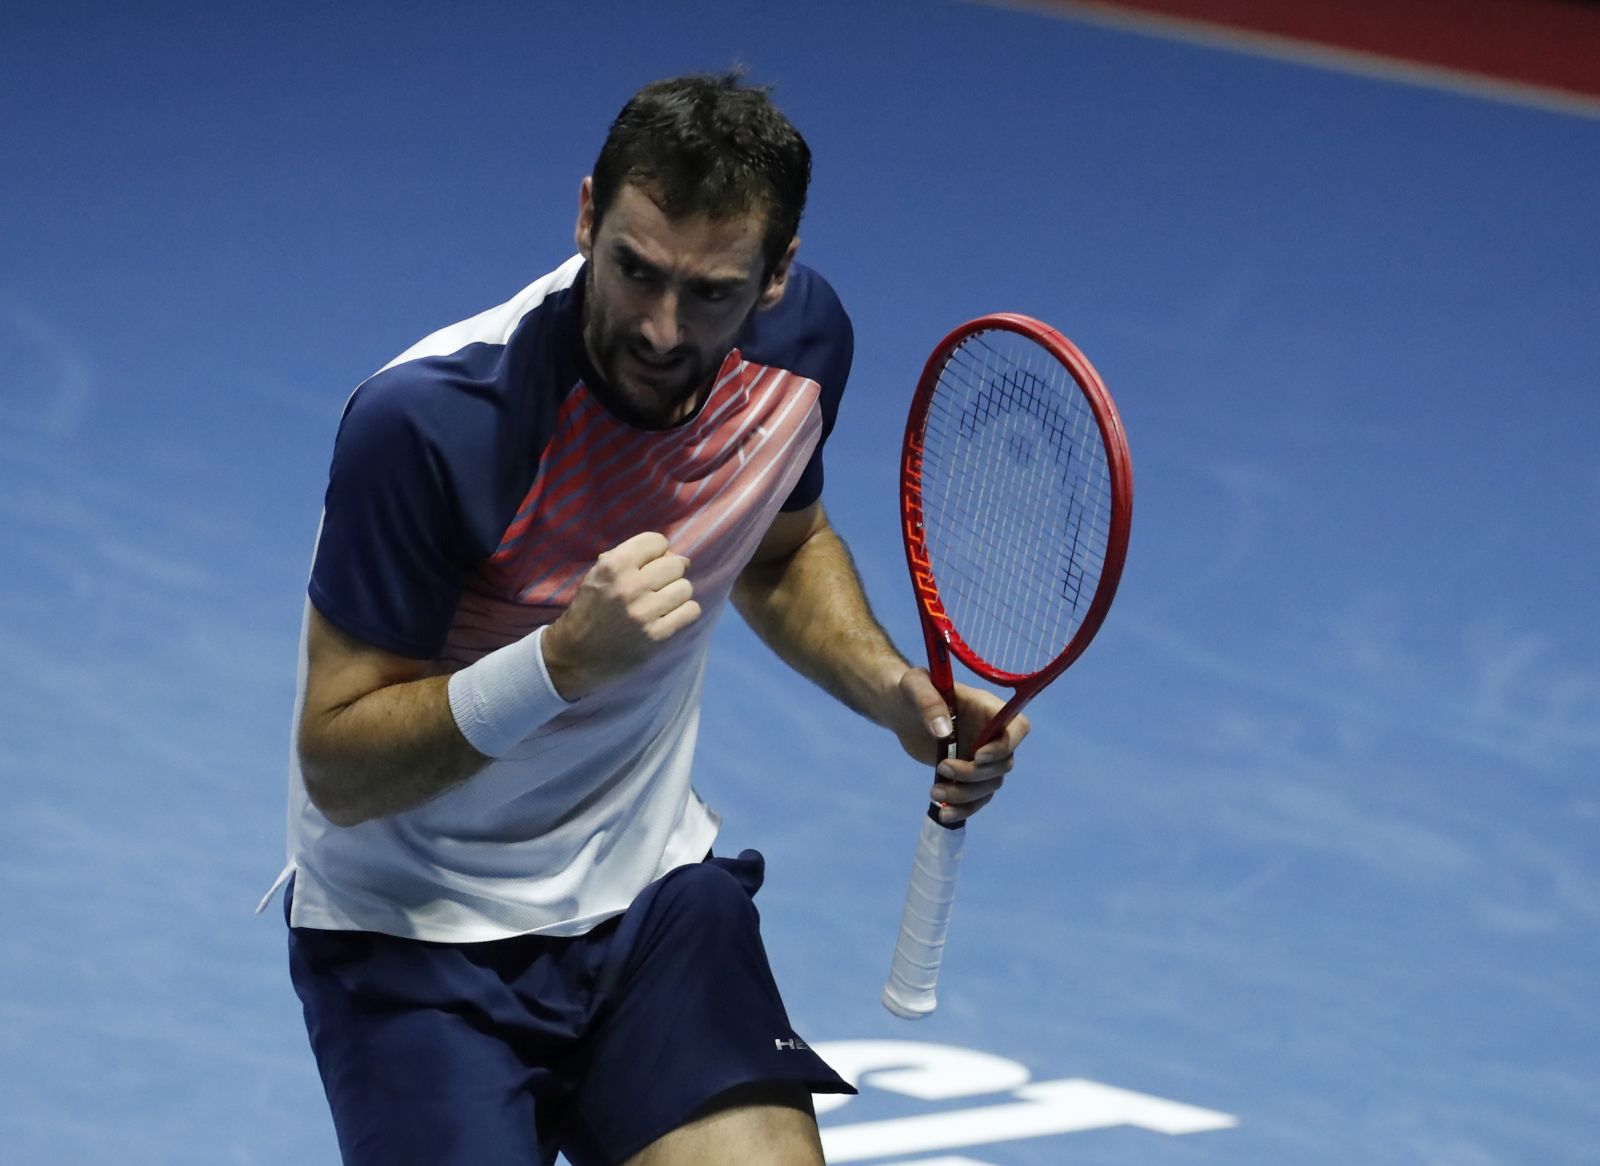 epa09556009 Marin Cilic of Croatia reacts during his final match against Taylor Fritz of the USA at the St.Petersburg Open ATP tennis tournament in St.Petersburg, Russia, 31 October 2021.  EPA/ANATOLY MALTSEV